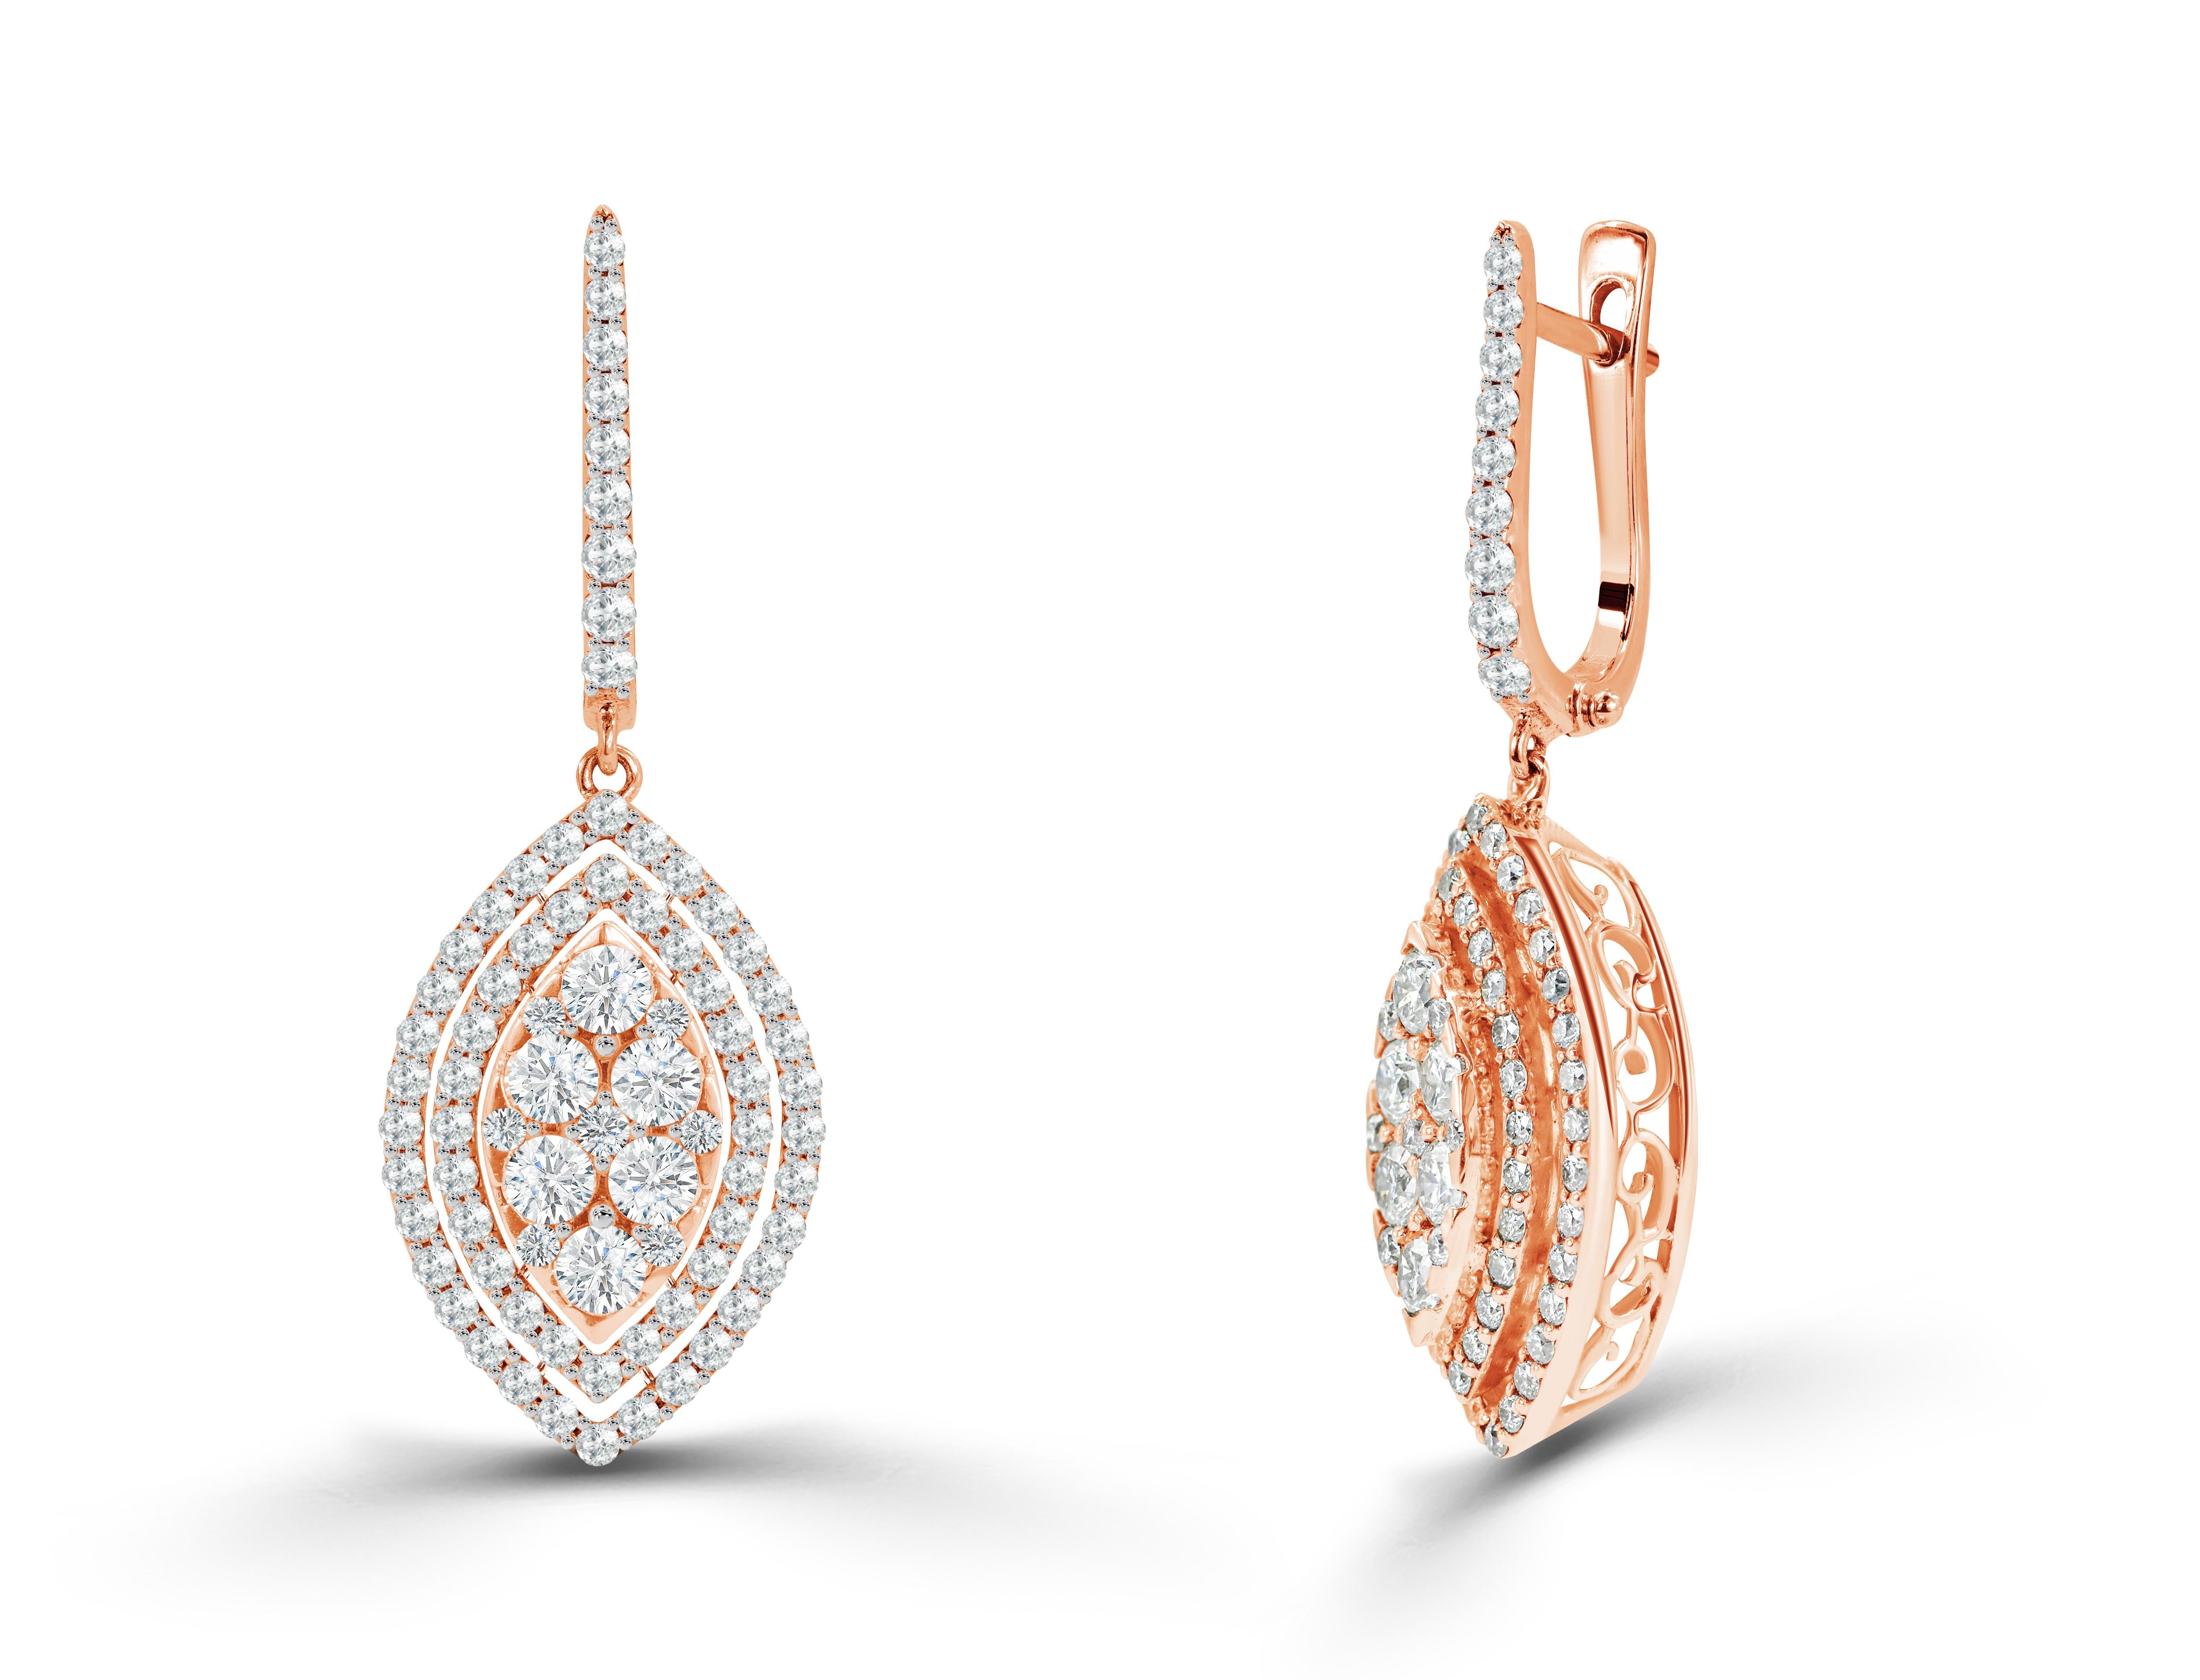 1.75 Ct Diamond Marquise shaped Drop Earrings in 18K Gold, Round Brilliant cut diamond earrings, Natural Diamond Earrings, Cluster dangle earrings, Heavy End Earrings.

Jewels By Tarry presents to you a beautiful Earring collection with natural